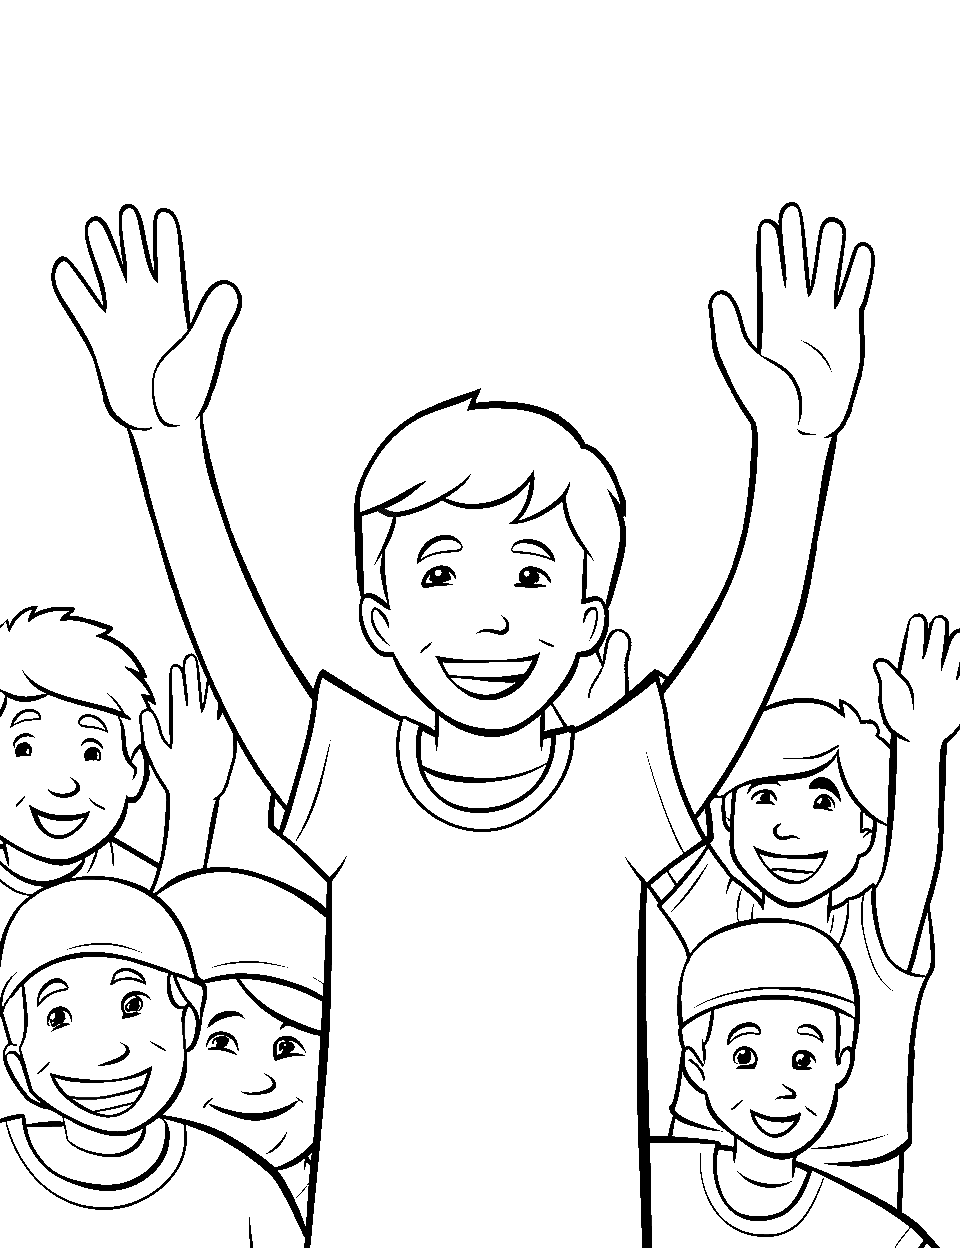 Fans Cheering Coloring Page - Fans in the stands cheering and waving.